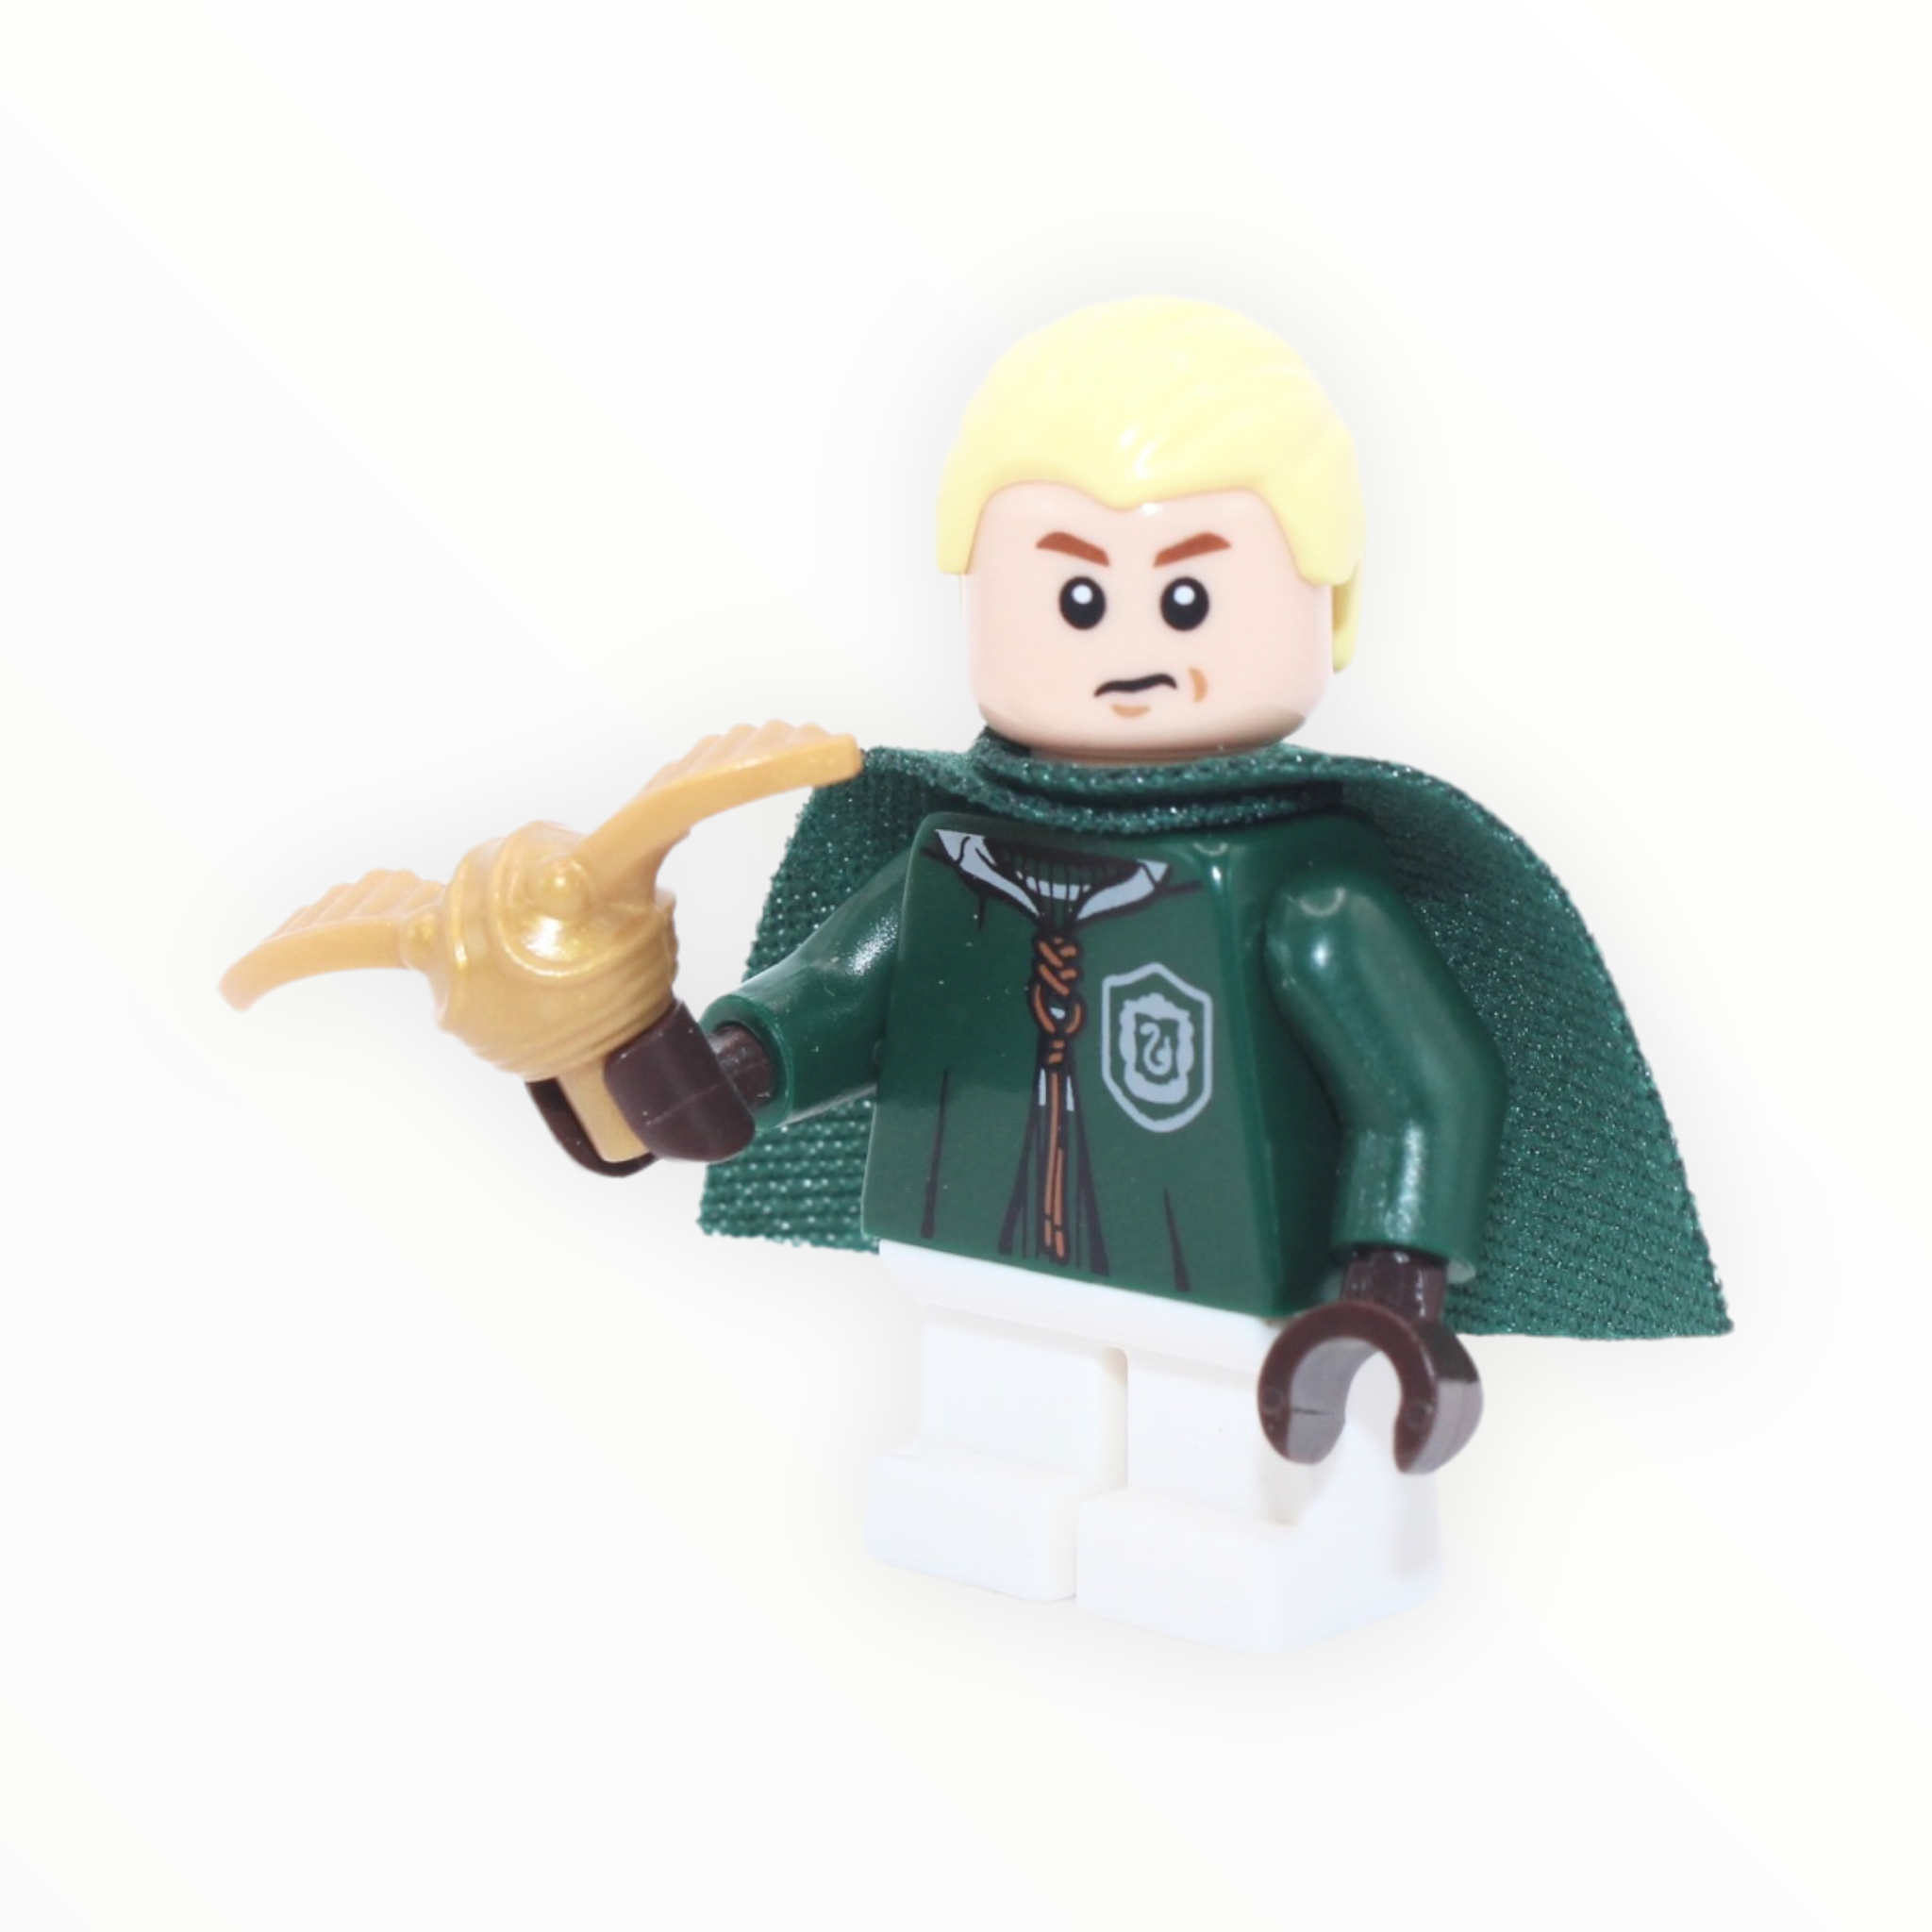 Harry Potter Series: Draco Malfoy in Quidditch Robes